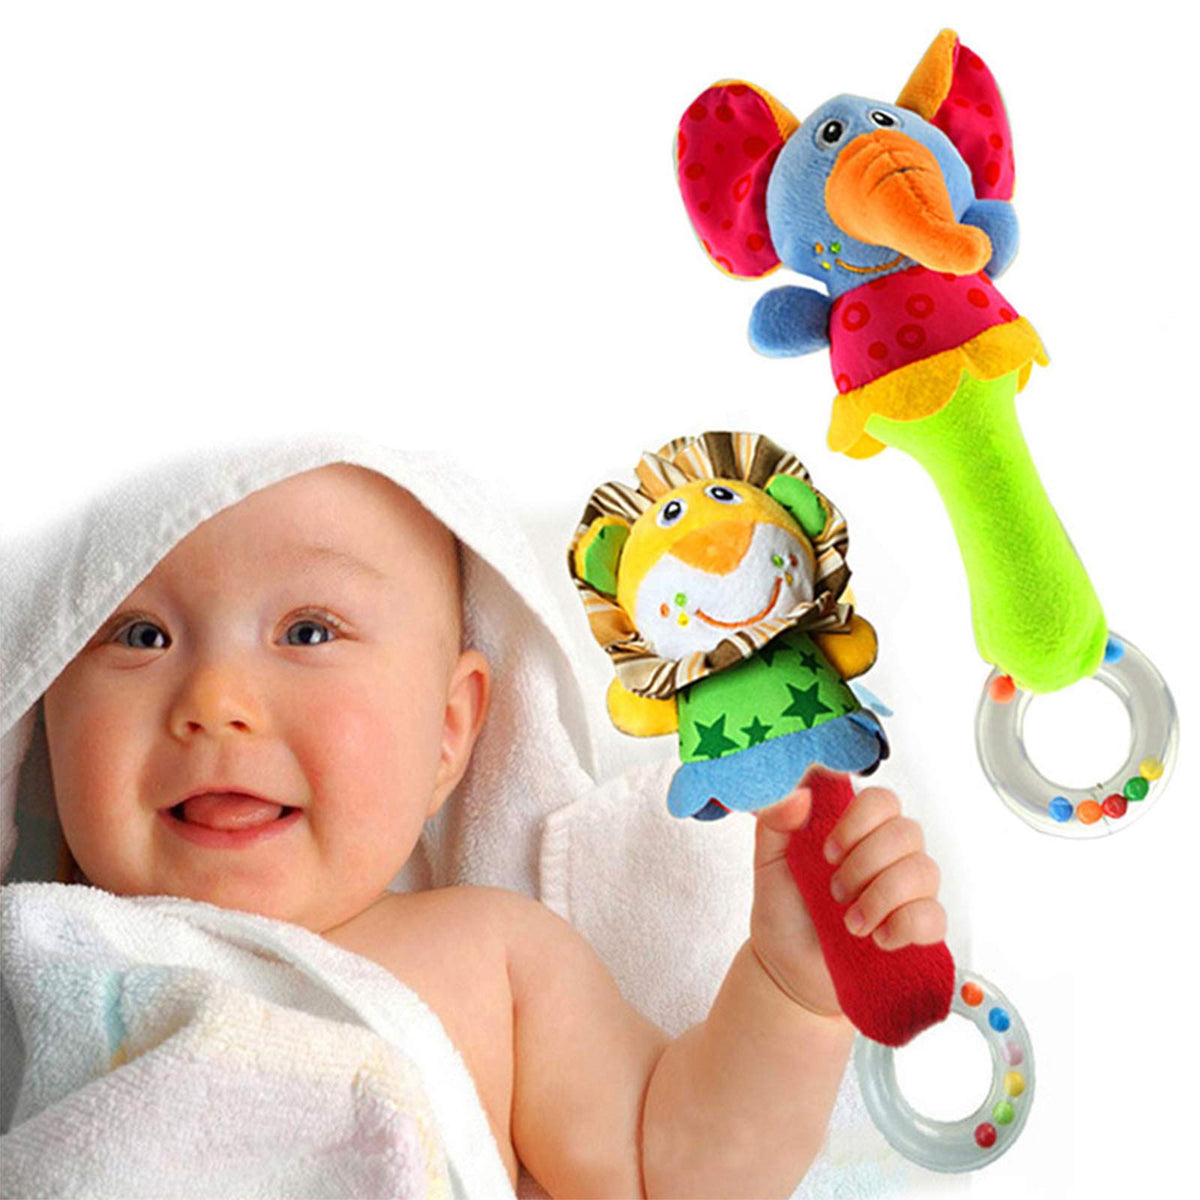 2 Pack Rattles Shaker Soft Baby Instruments Sensory Toy Cute Stuffed Animal Toy Infant Developmental Hand Grip for 3 6 9 12 Months